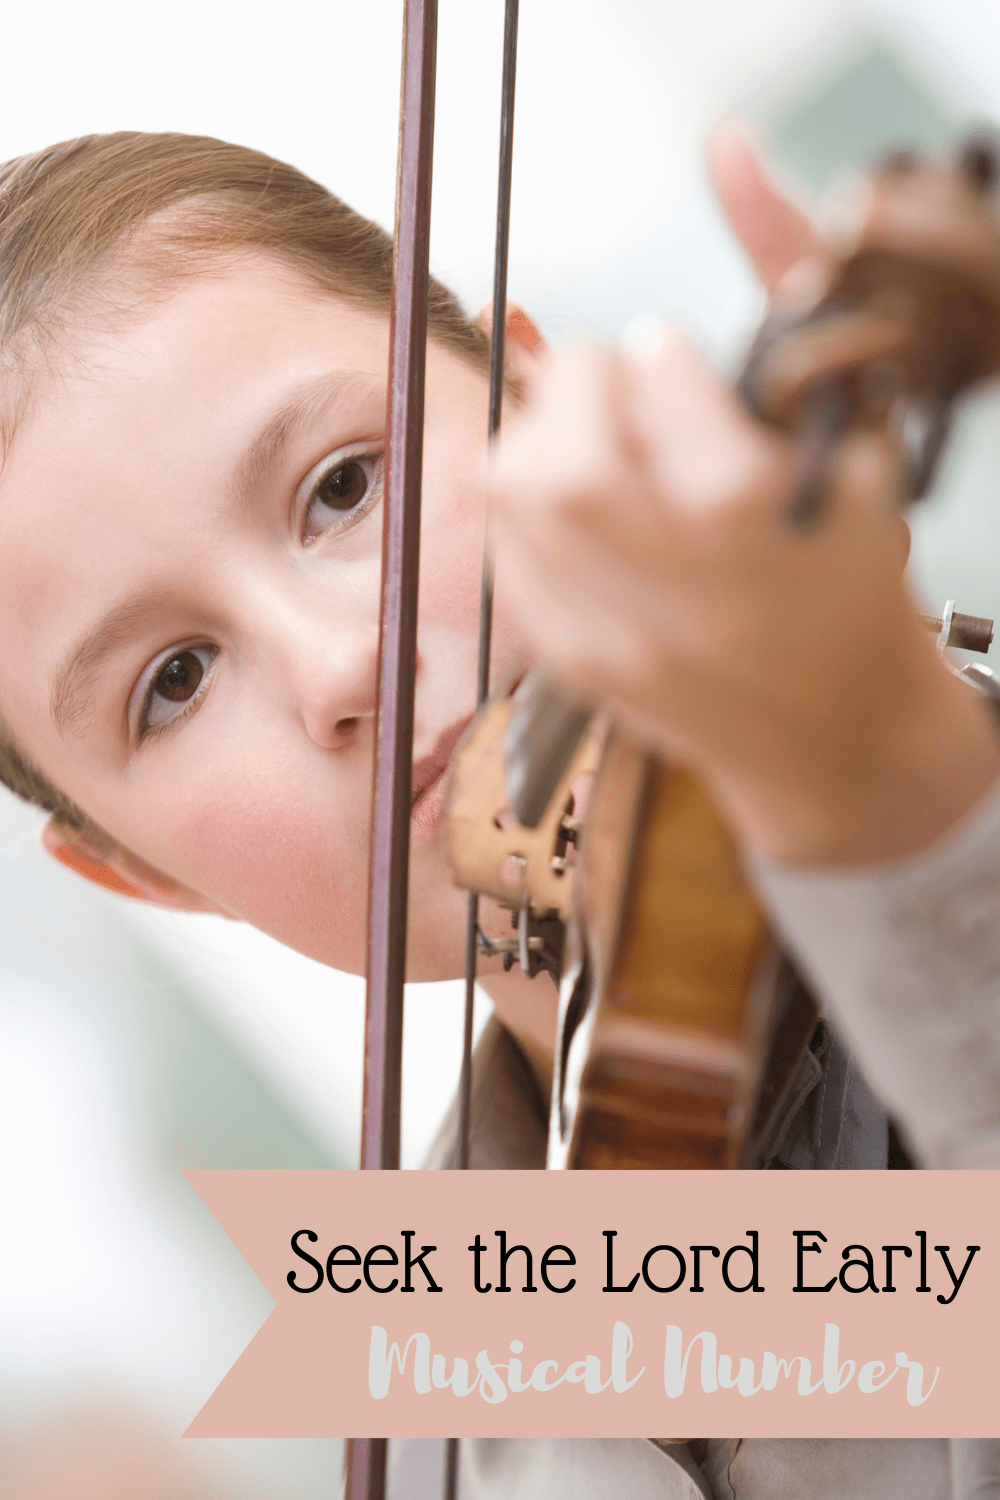 Seek the Lord Early Musical Number Easy singing time ideas for Primary Music Leaders Seek Lord Early Musical Number